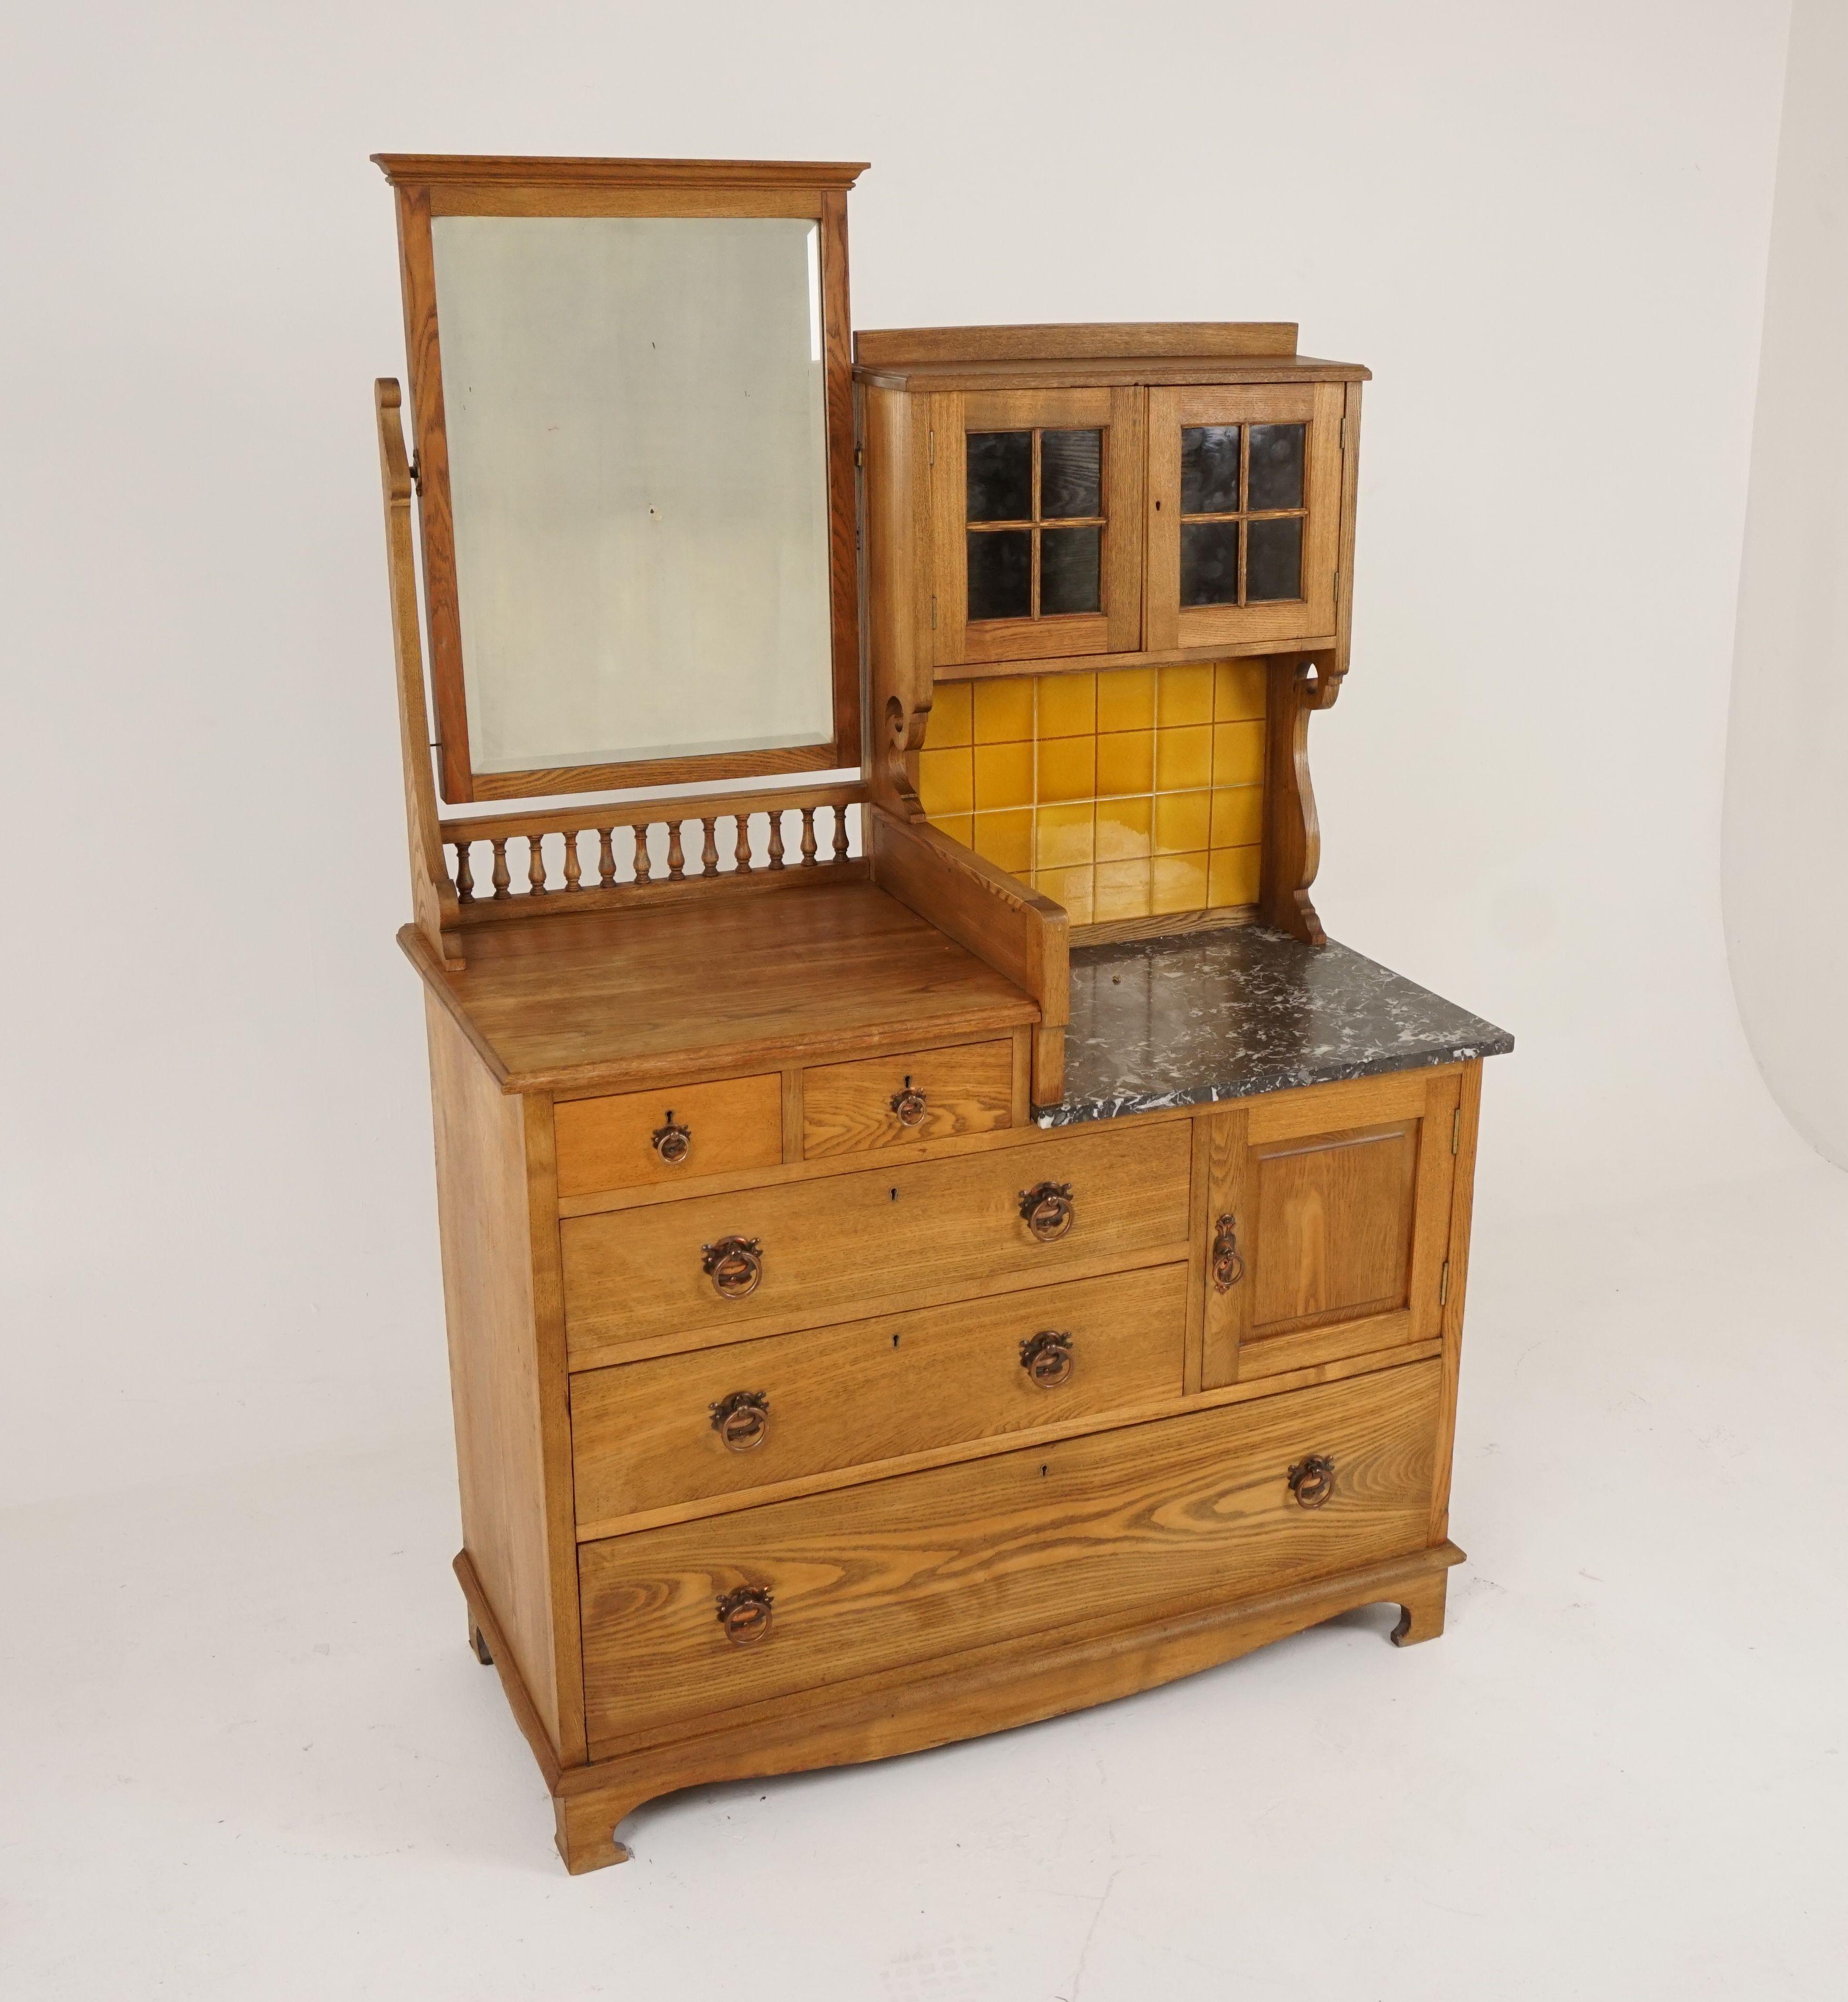 Arts & Crafts ash marble top vanity, dressing chest washstand, Scotland, 1900, B2164

Scotland, 1900
Solid ash
Original finish
Beveled mirror to left top
Pair of glass doors to the top right
Tiled back splash and grained marble top